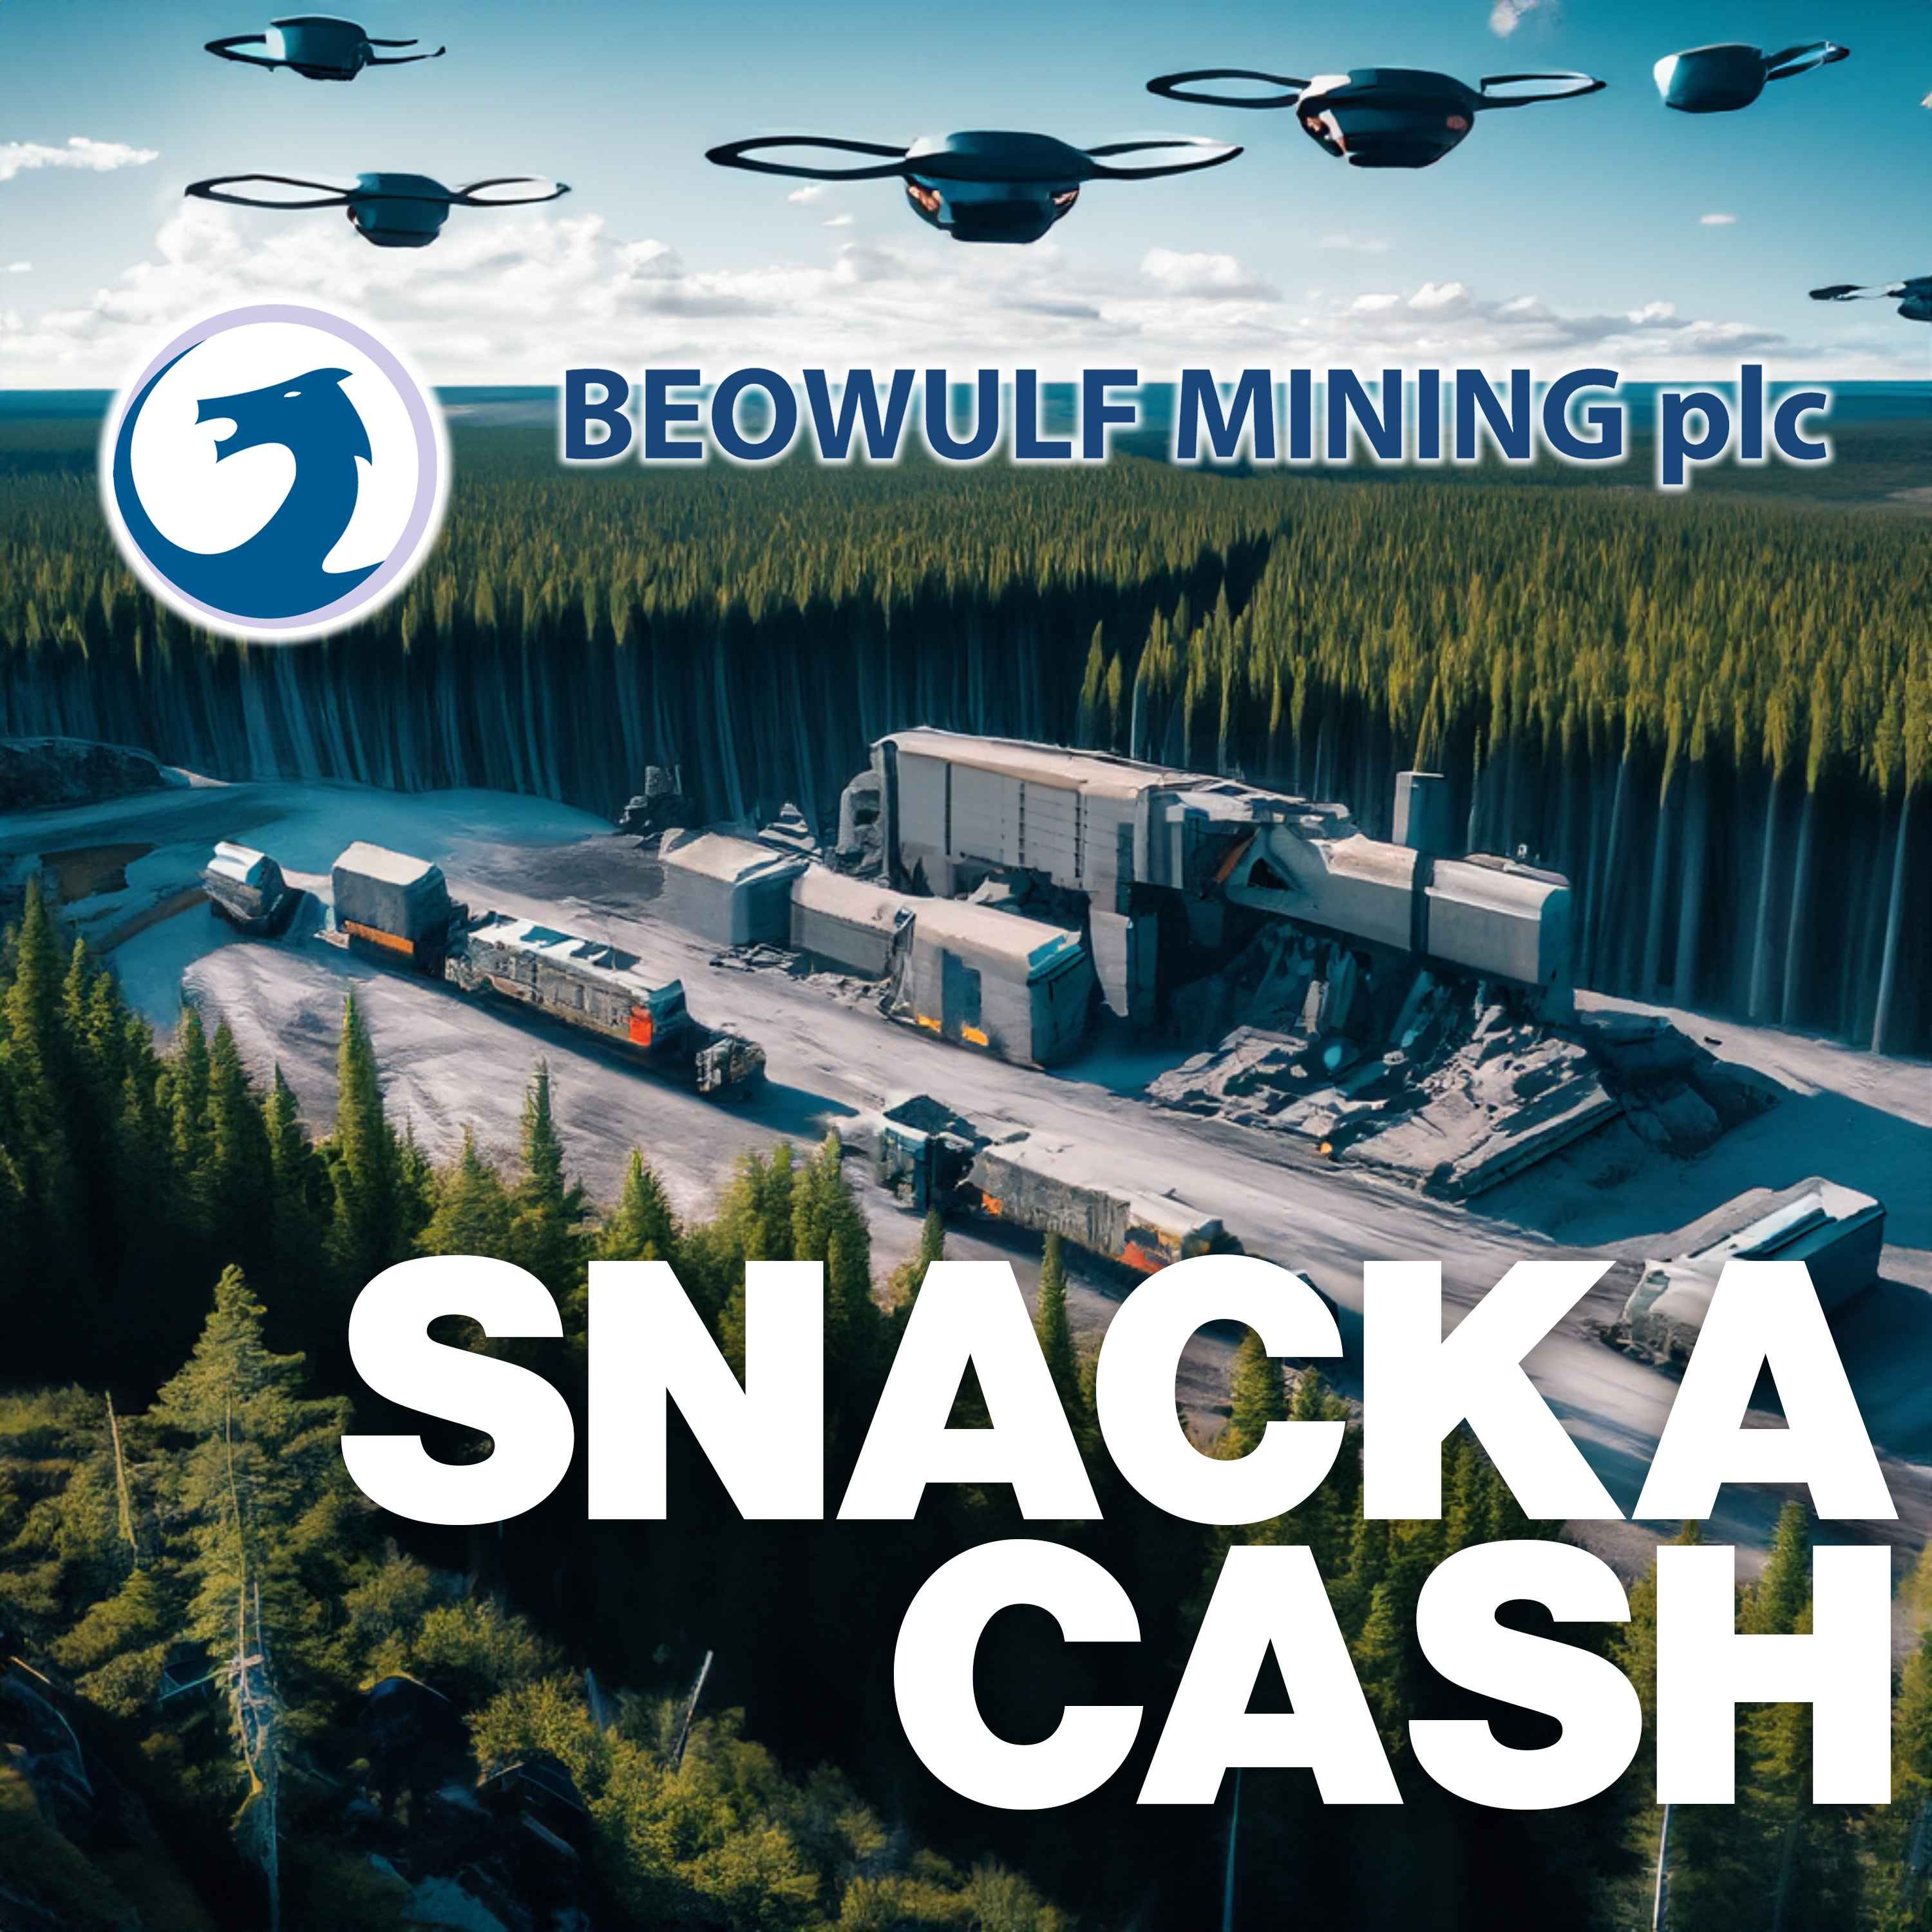 Red flag: Beowulf Mining